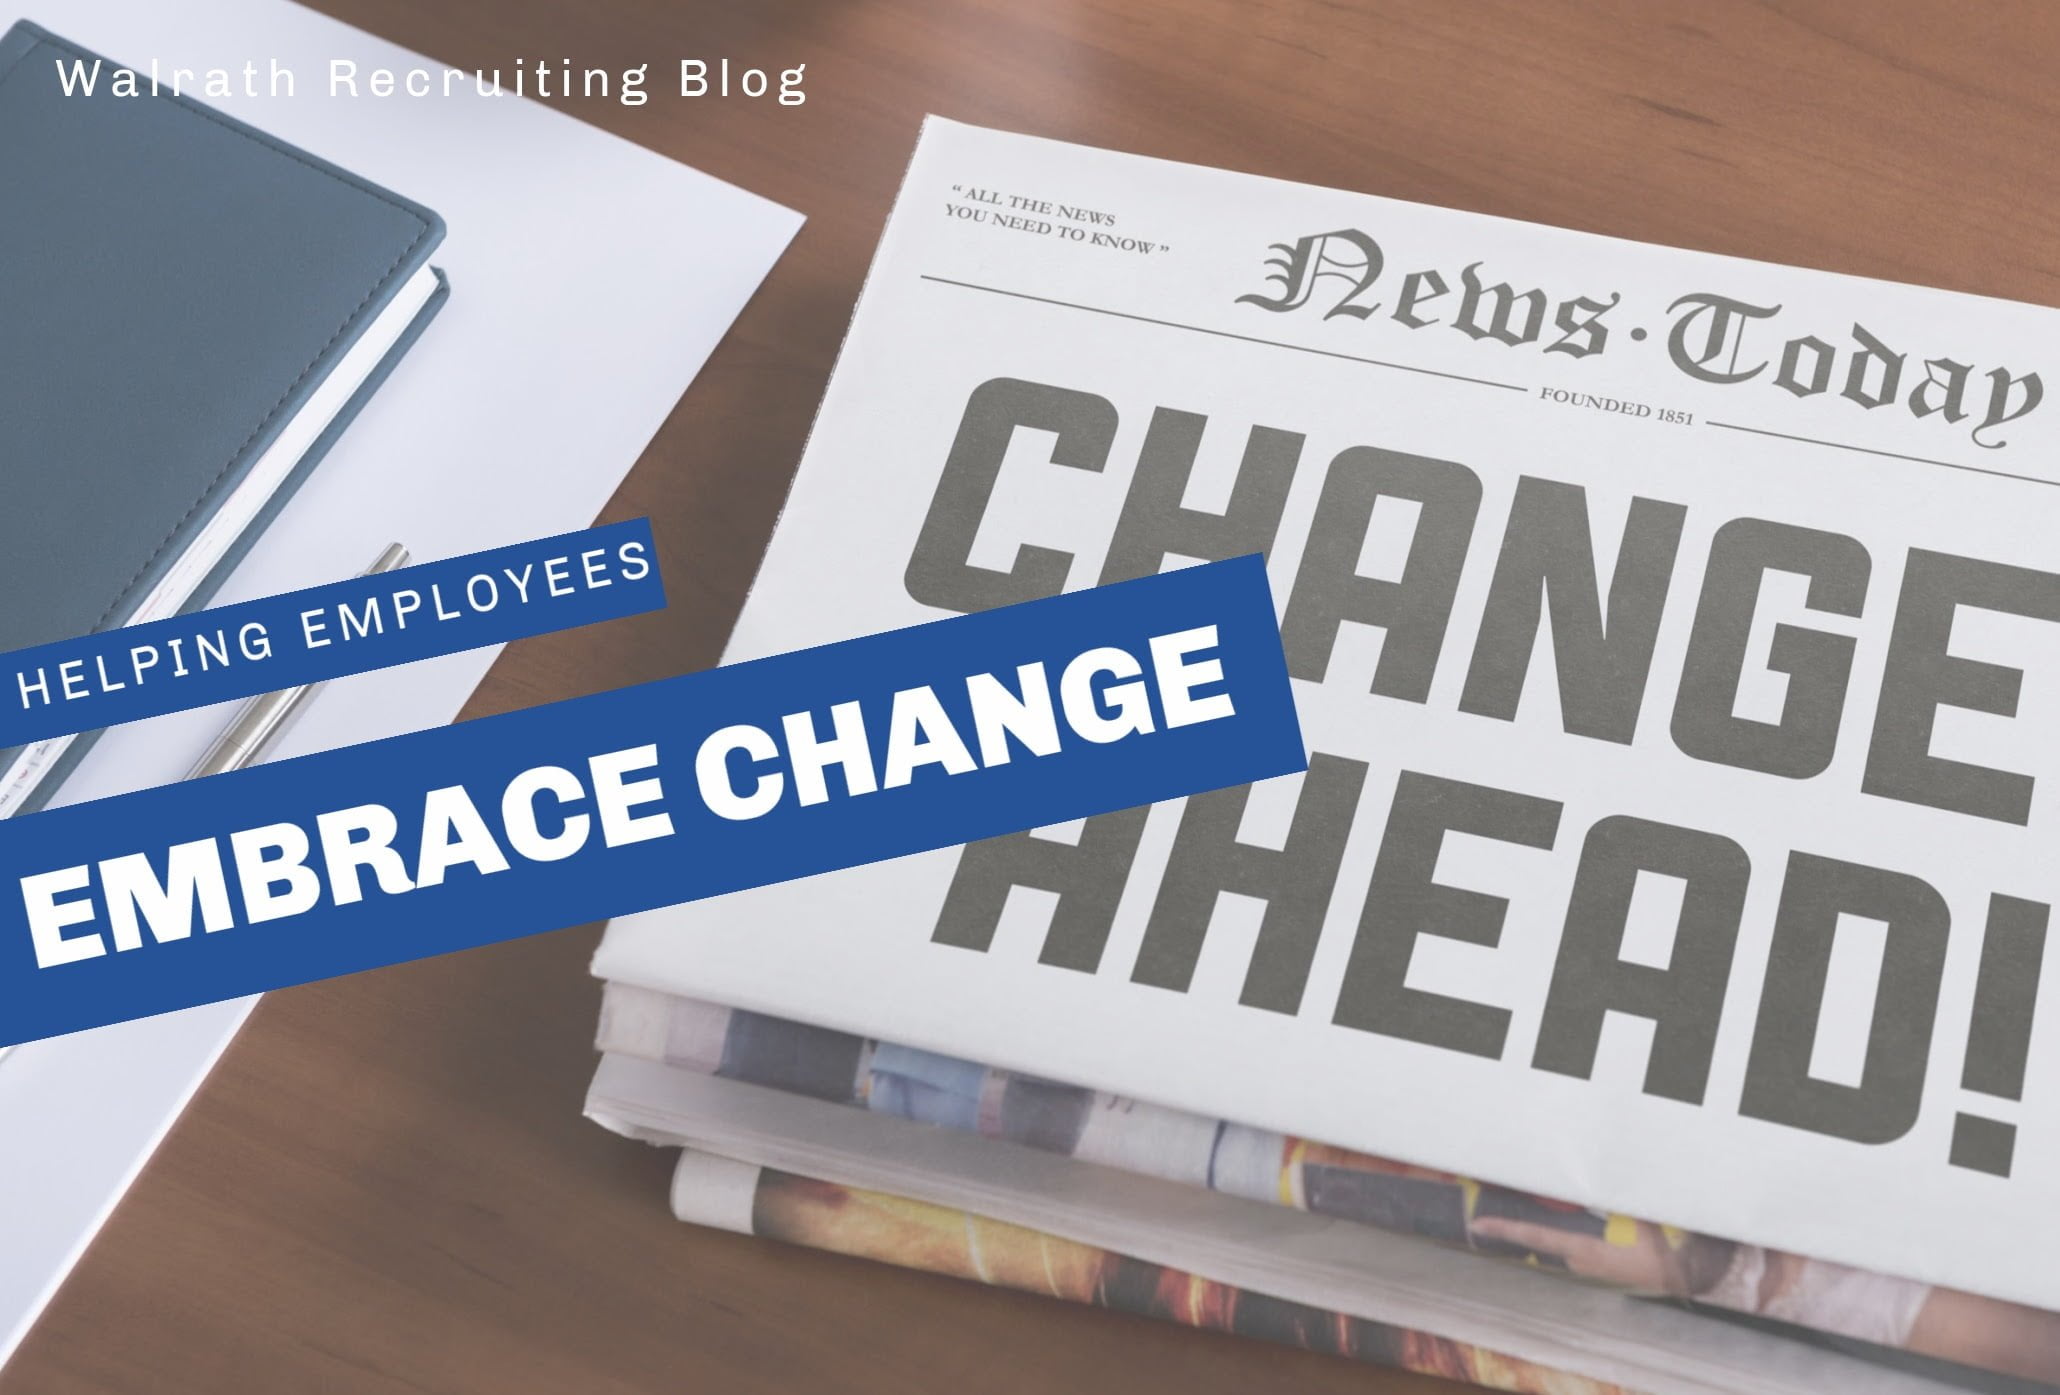 These tips will help managers support their employees through changes in the workplace.